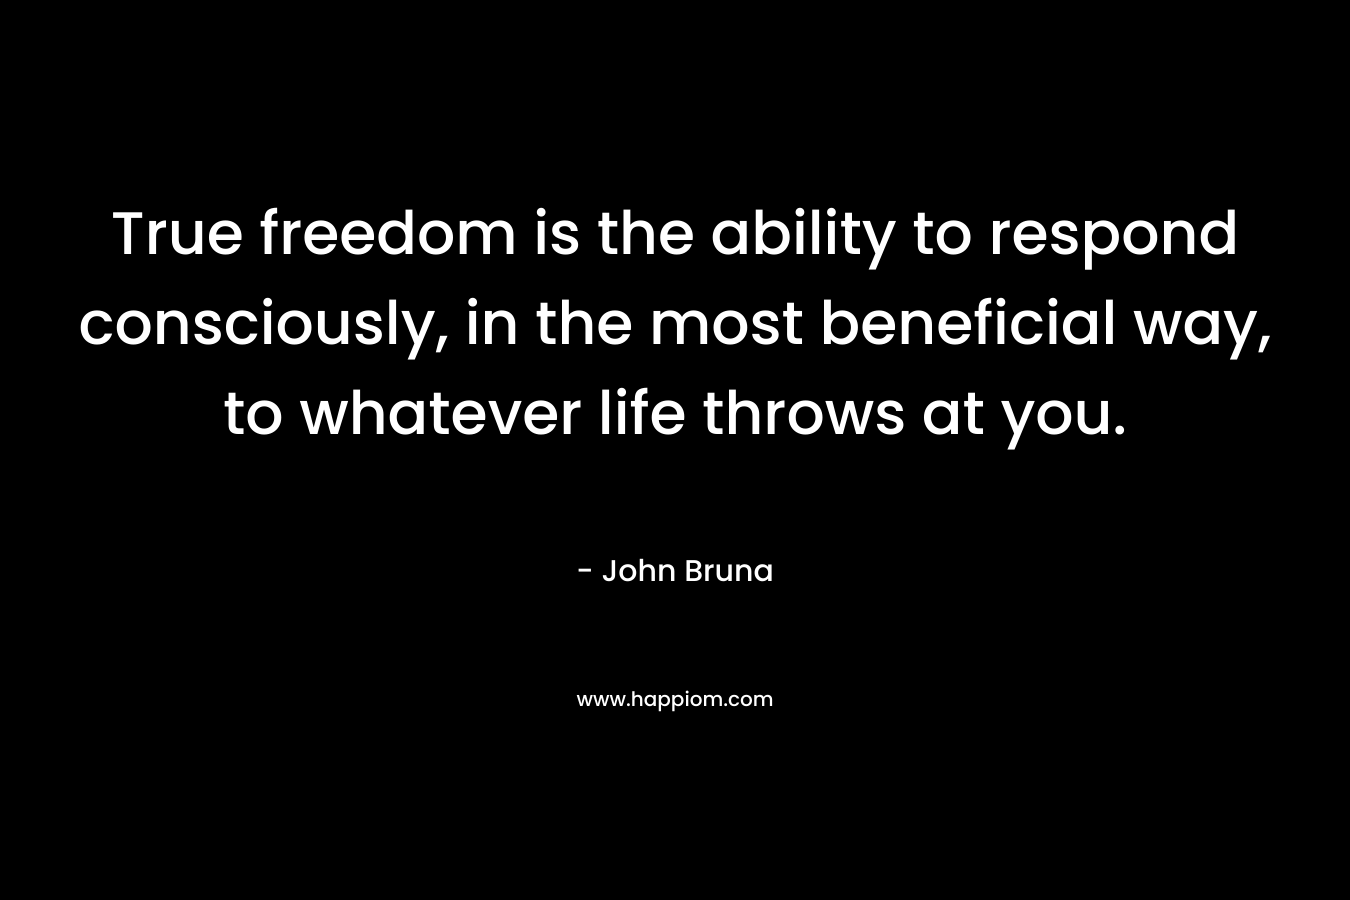 True freedom is the ability to respond consciously, in the most beneficial way, to whatever life throws at you.